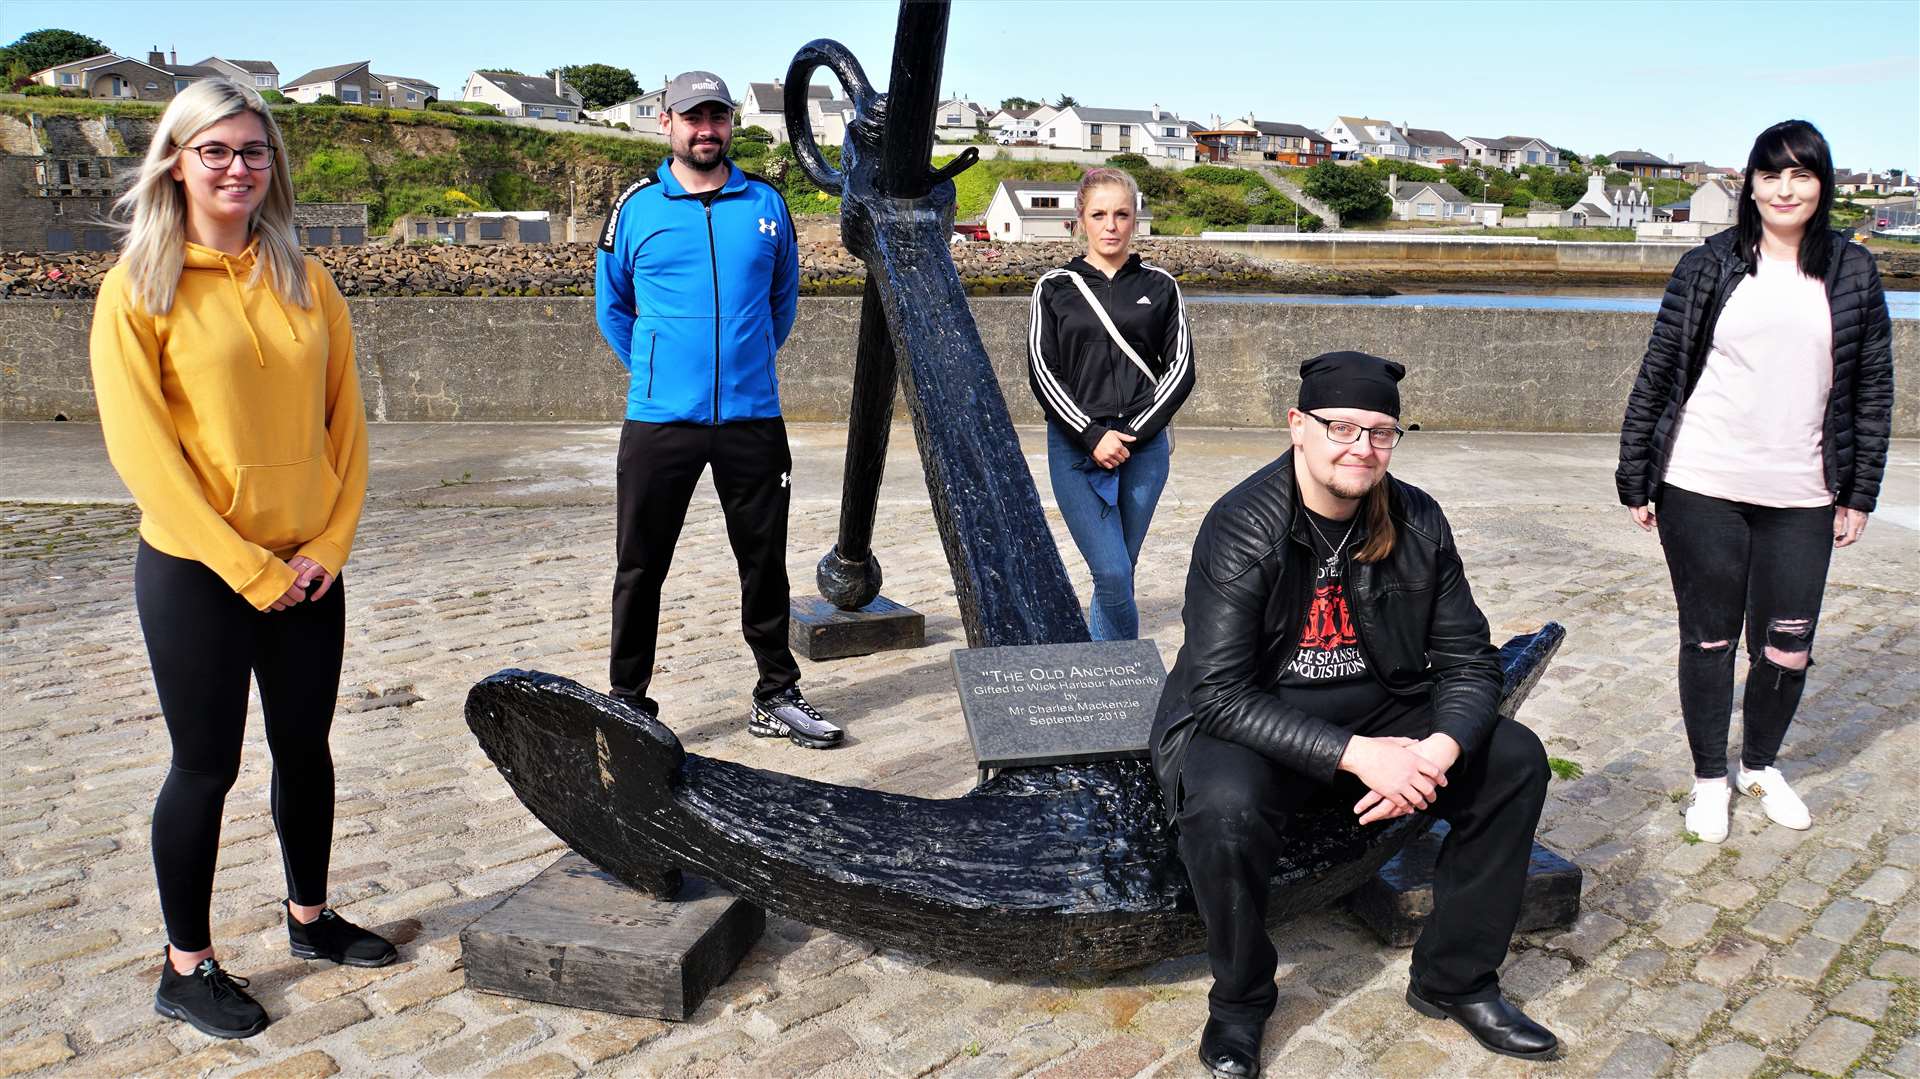 Core members of the Facebook group No More Lost Souls (standing, from left) Jade Sinclair, Ricky Ross, Natasha Kelly and Gemma Fraser with Steven Szyfelbain (seated). The anchor is a symbol used on the group's Facebook page. Picture: DGS